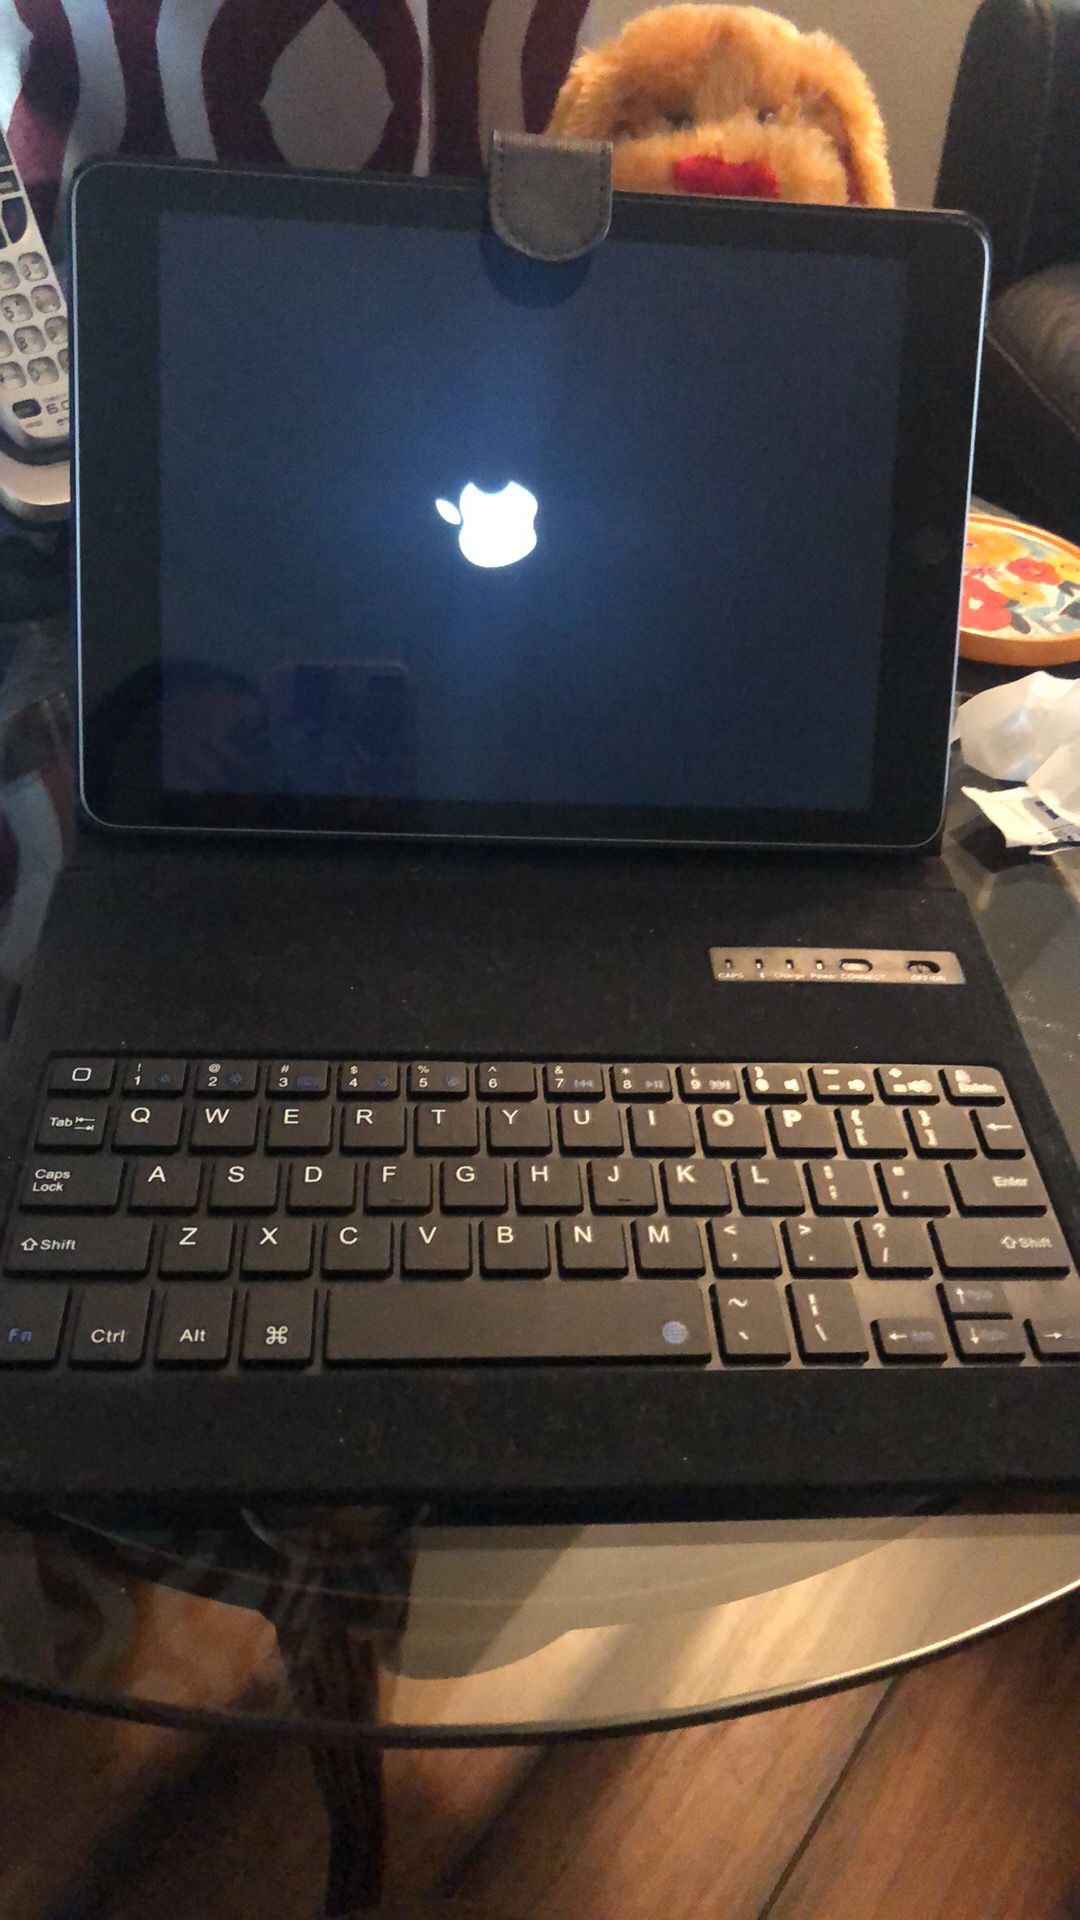 2018 Apple IPad 9.7” w/ 32GB WiFi Tablet w/ Bluetooth for Sale Includes Keyboard attachment Case!